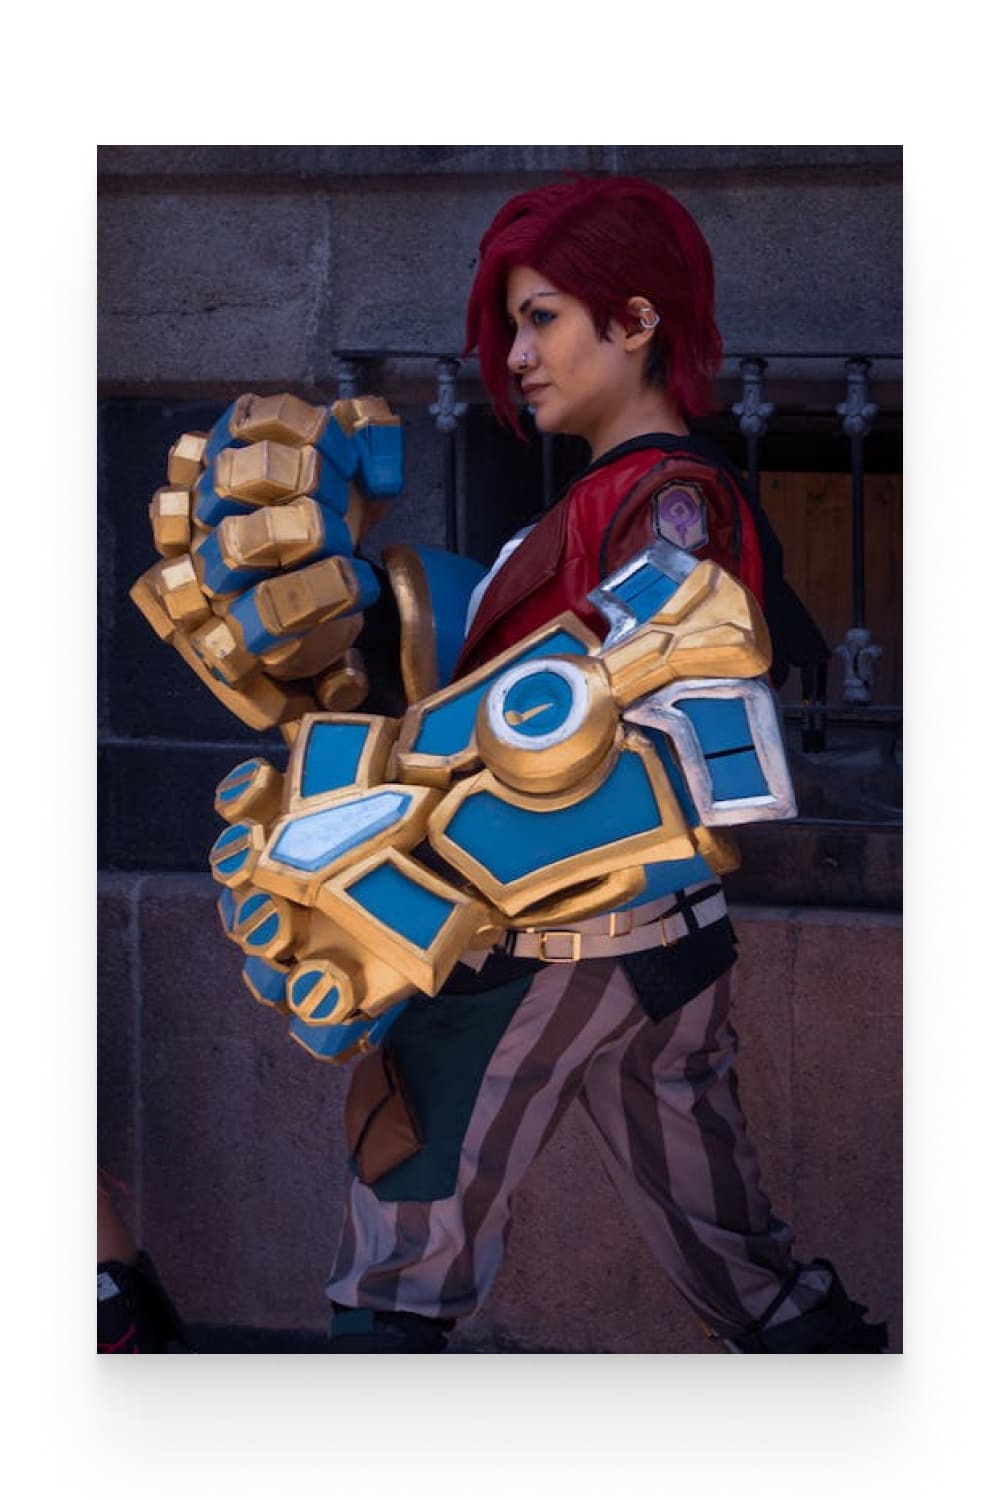 A Woman Doing Cosplay with big arms.